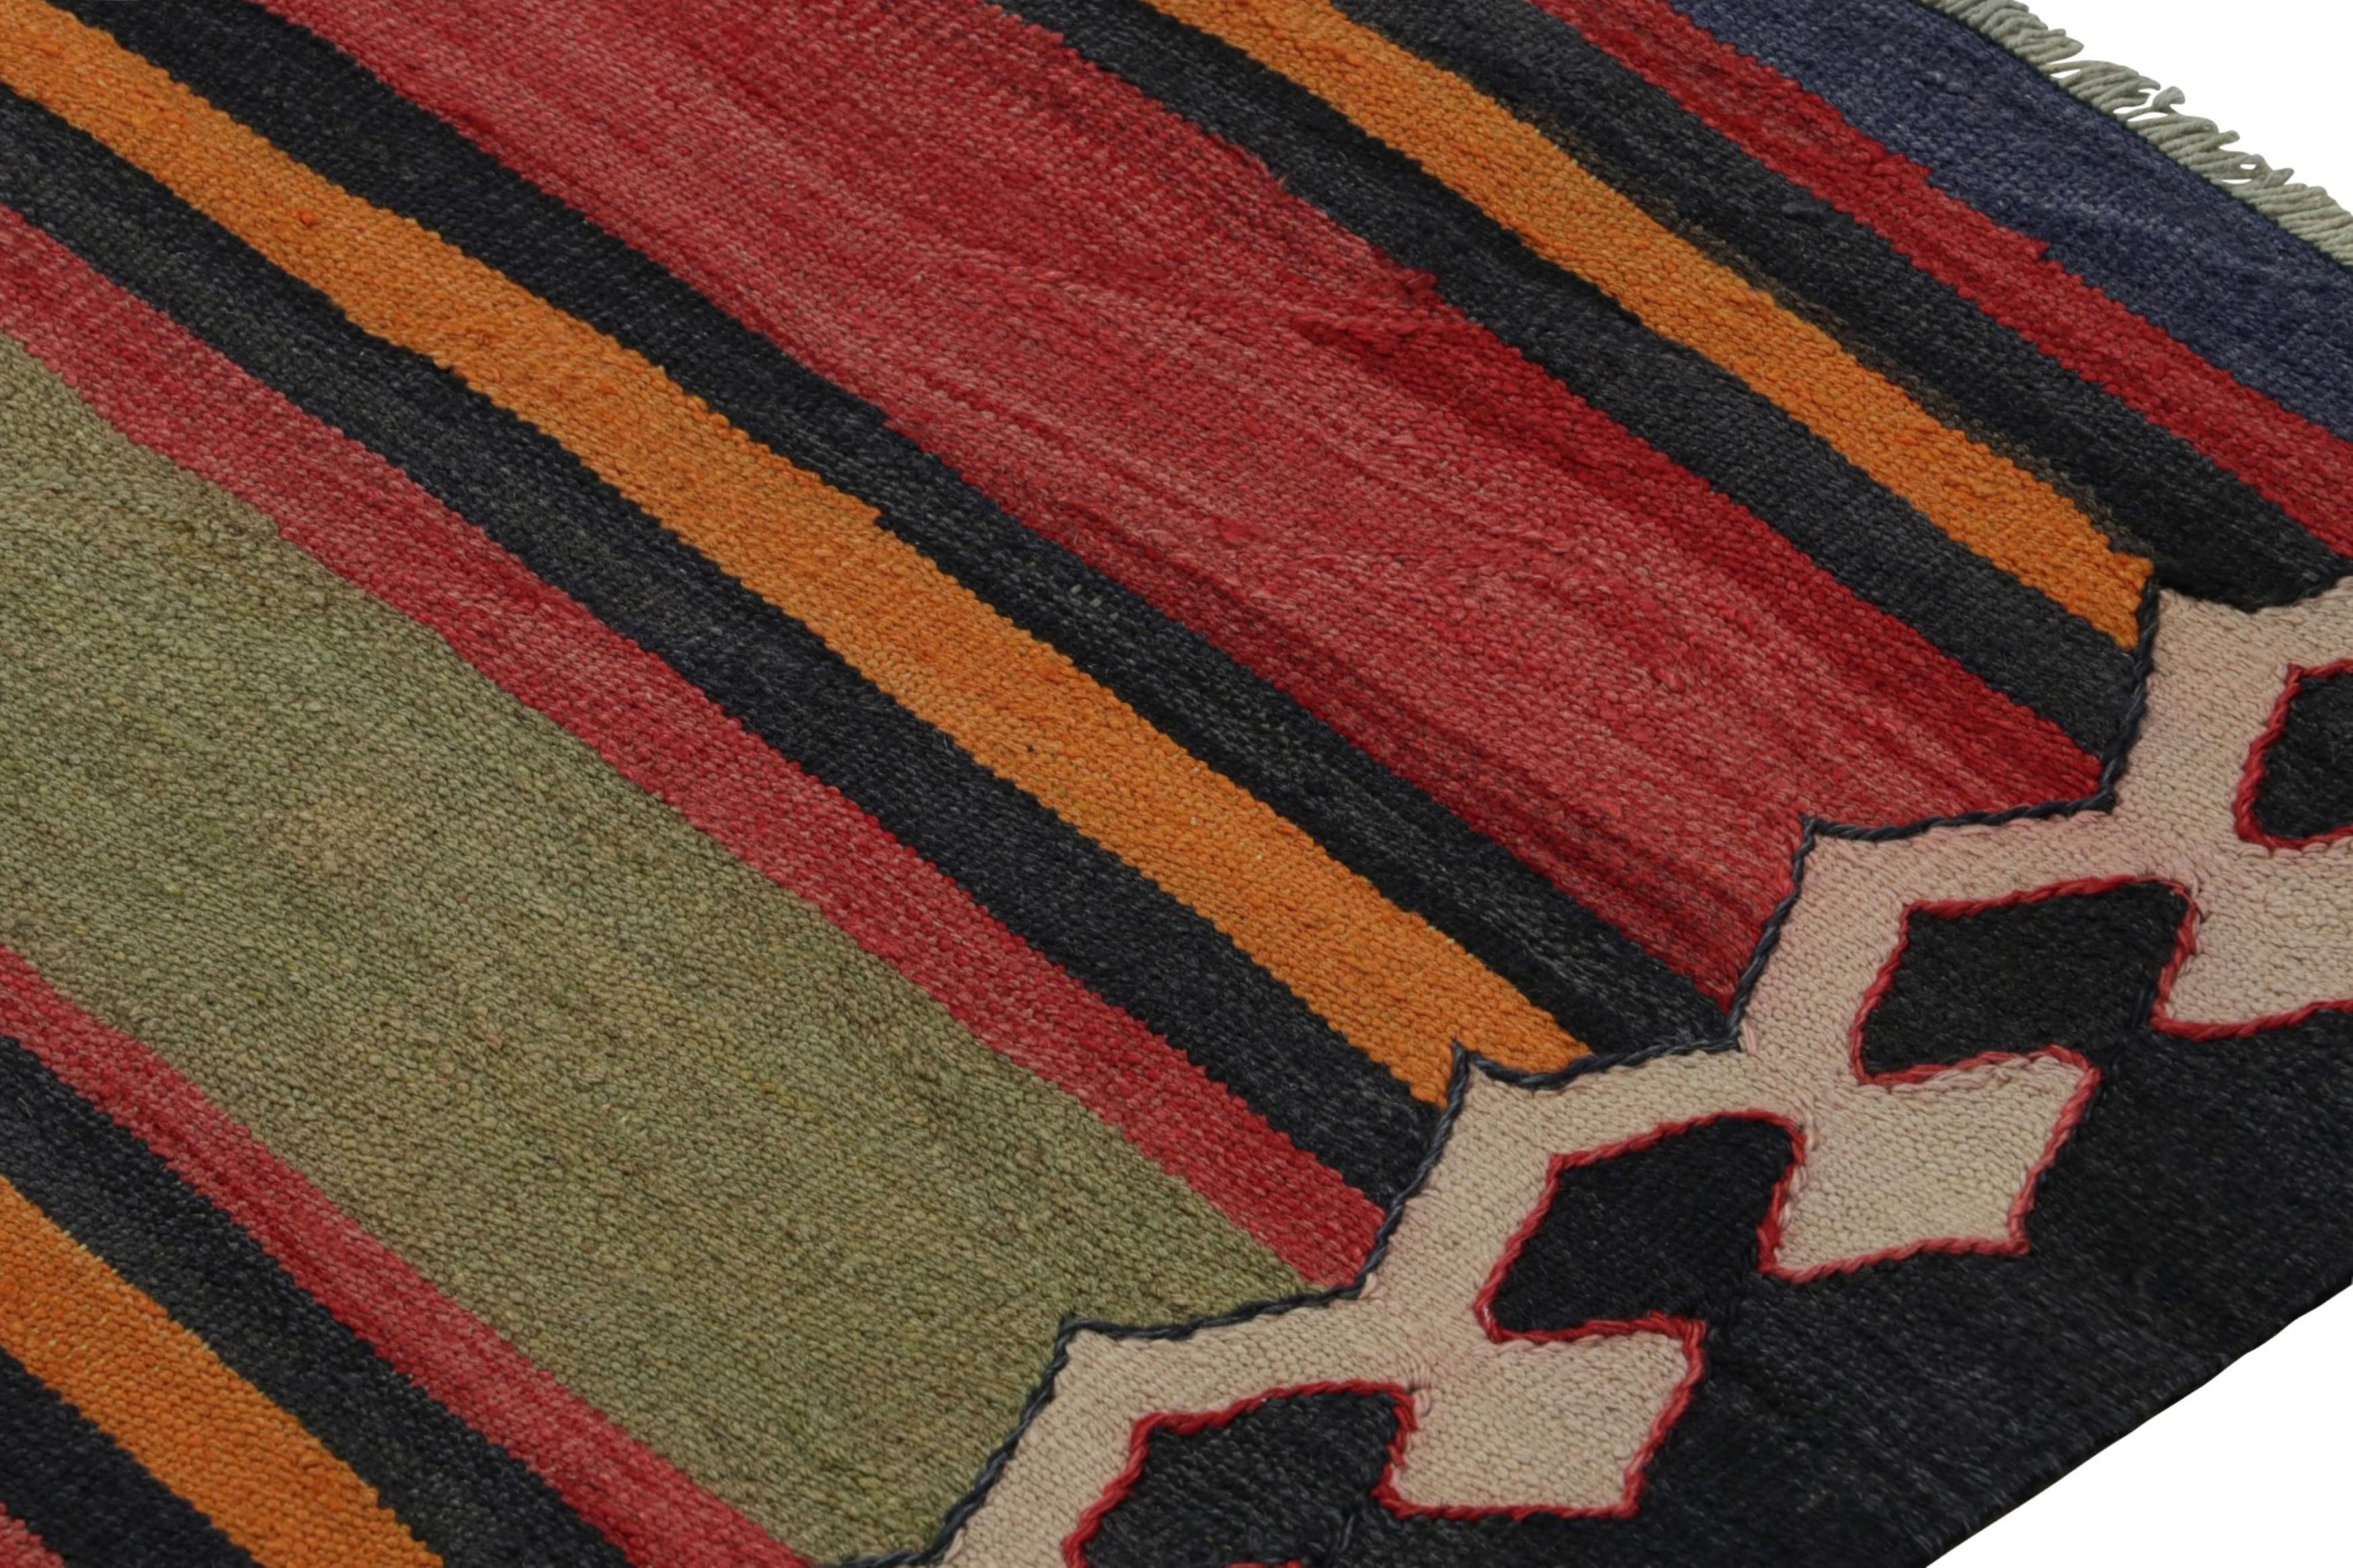 Mid-20th Century Vintage Afghan Tribal Kilim Runner Rug with Colorful Stripes, from Rug & Kilim For Sale